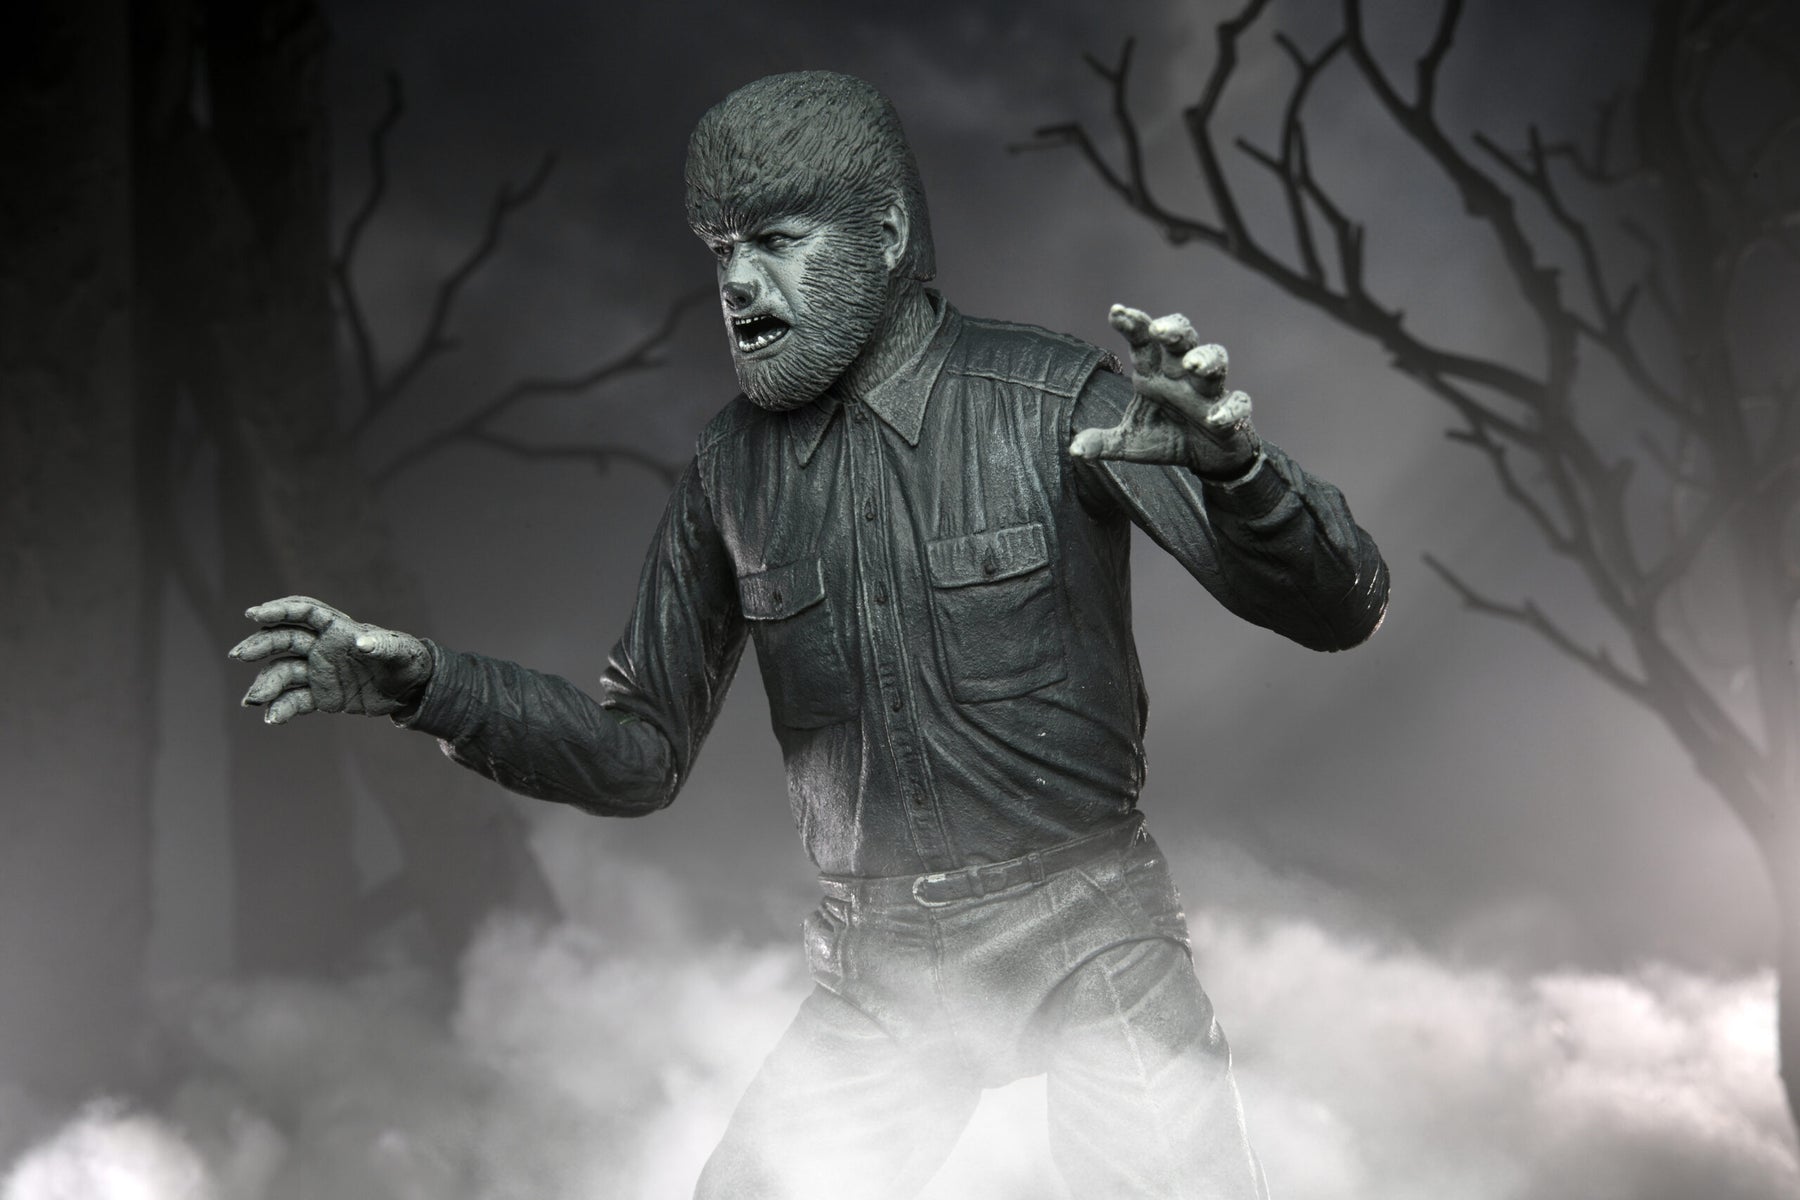 NECA - Universal Monsters - Ultimate Wolf Man (B&W) 7" Action Figure